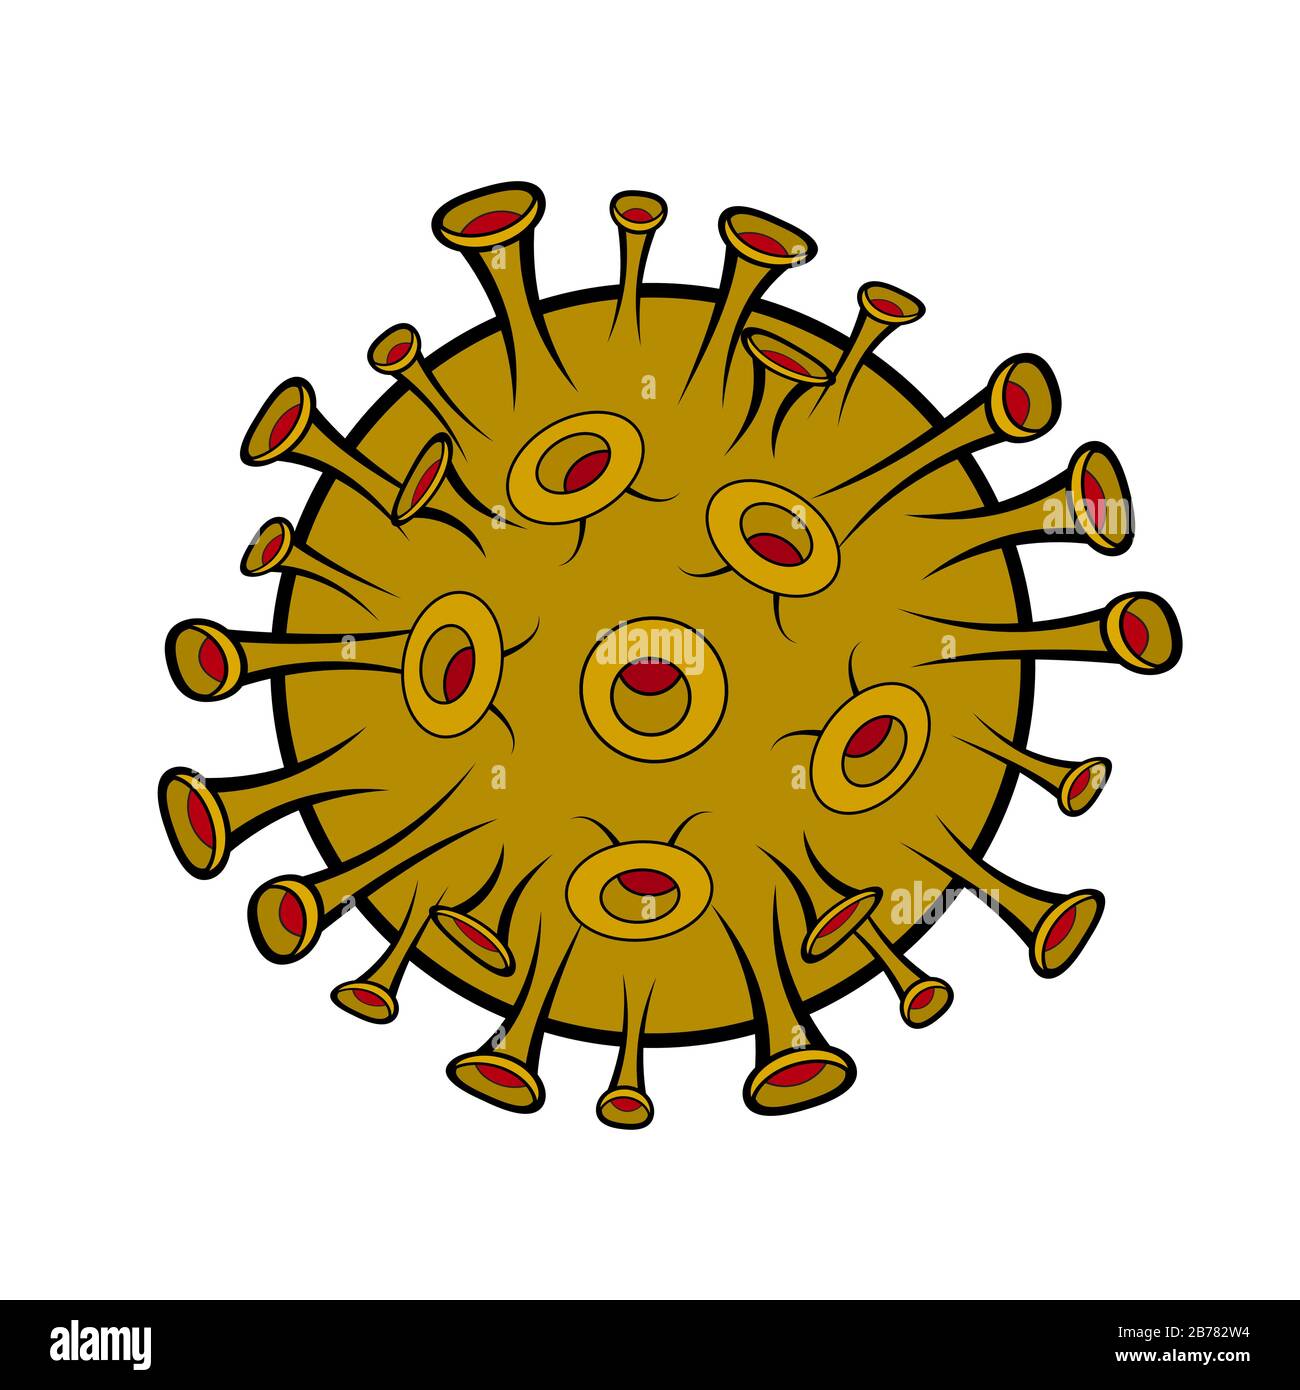 Coronavirus cartoon illustration isolated on white background. microorganism, disinfection, sterilization or sanitization. Ideal for educational and i Stock Vector